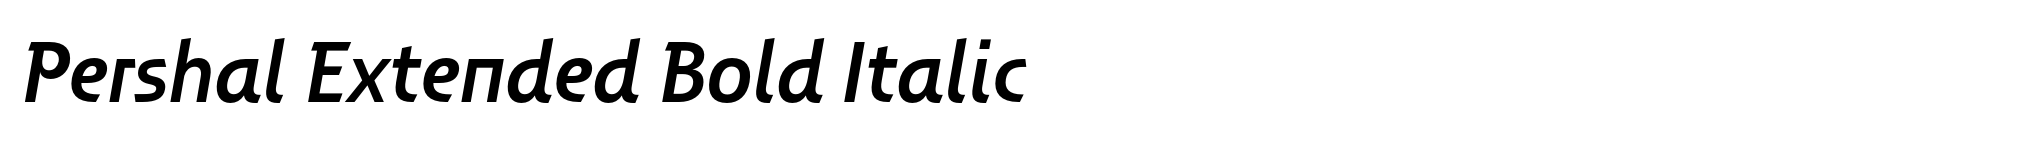 Pershal Extended Bold Italic image